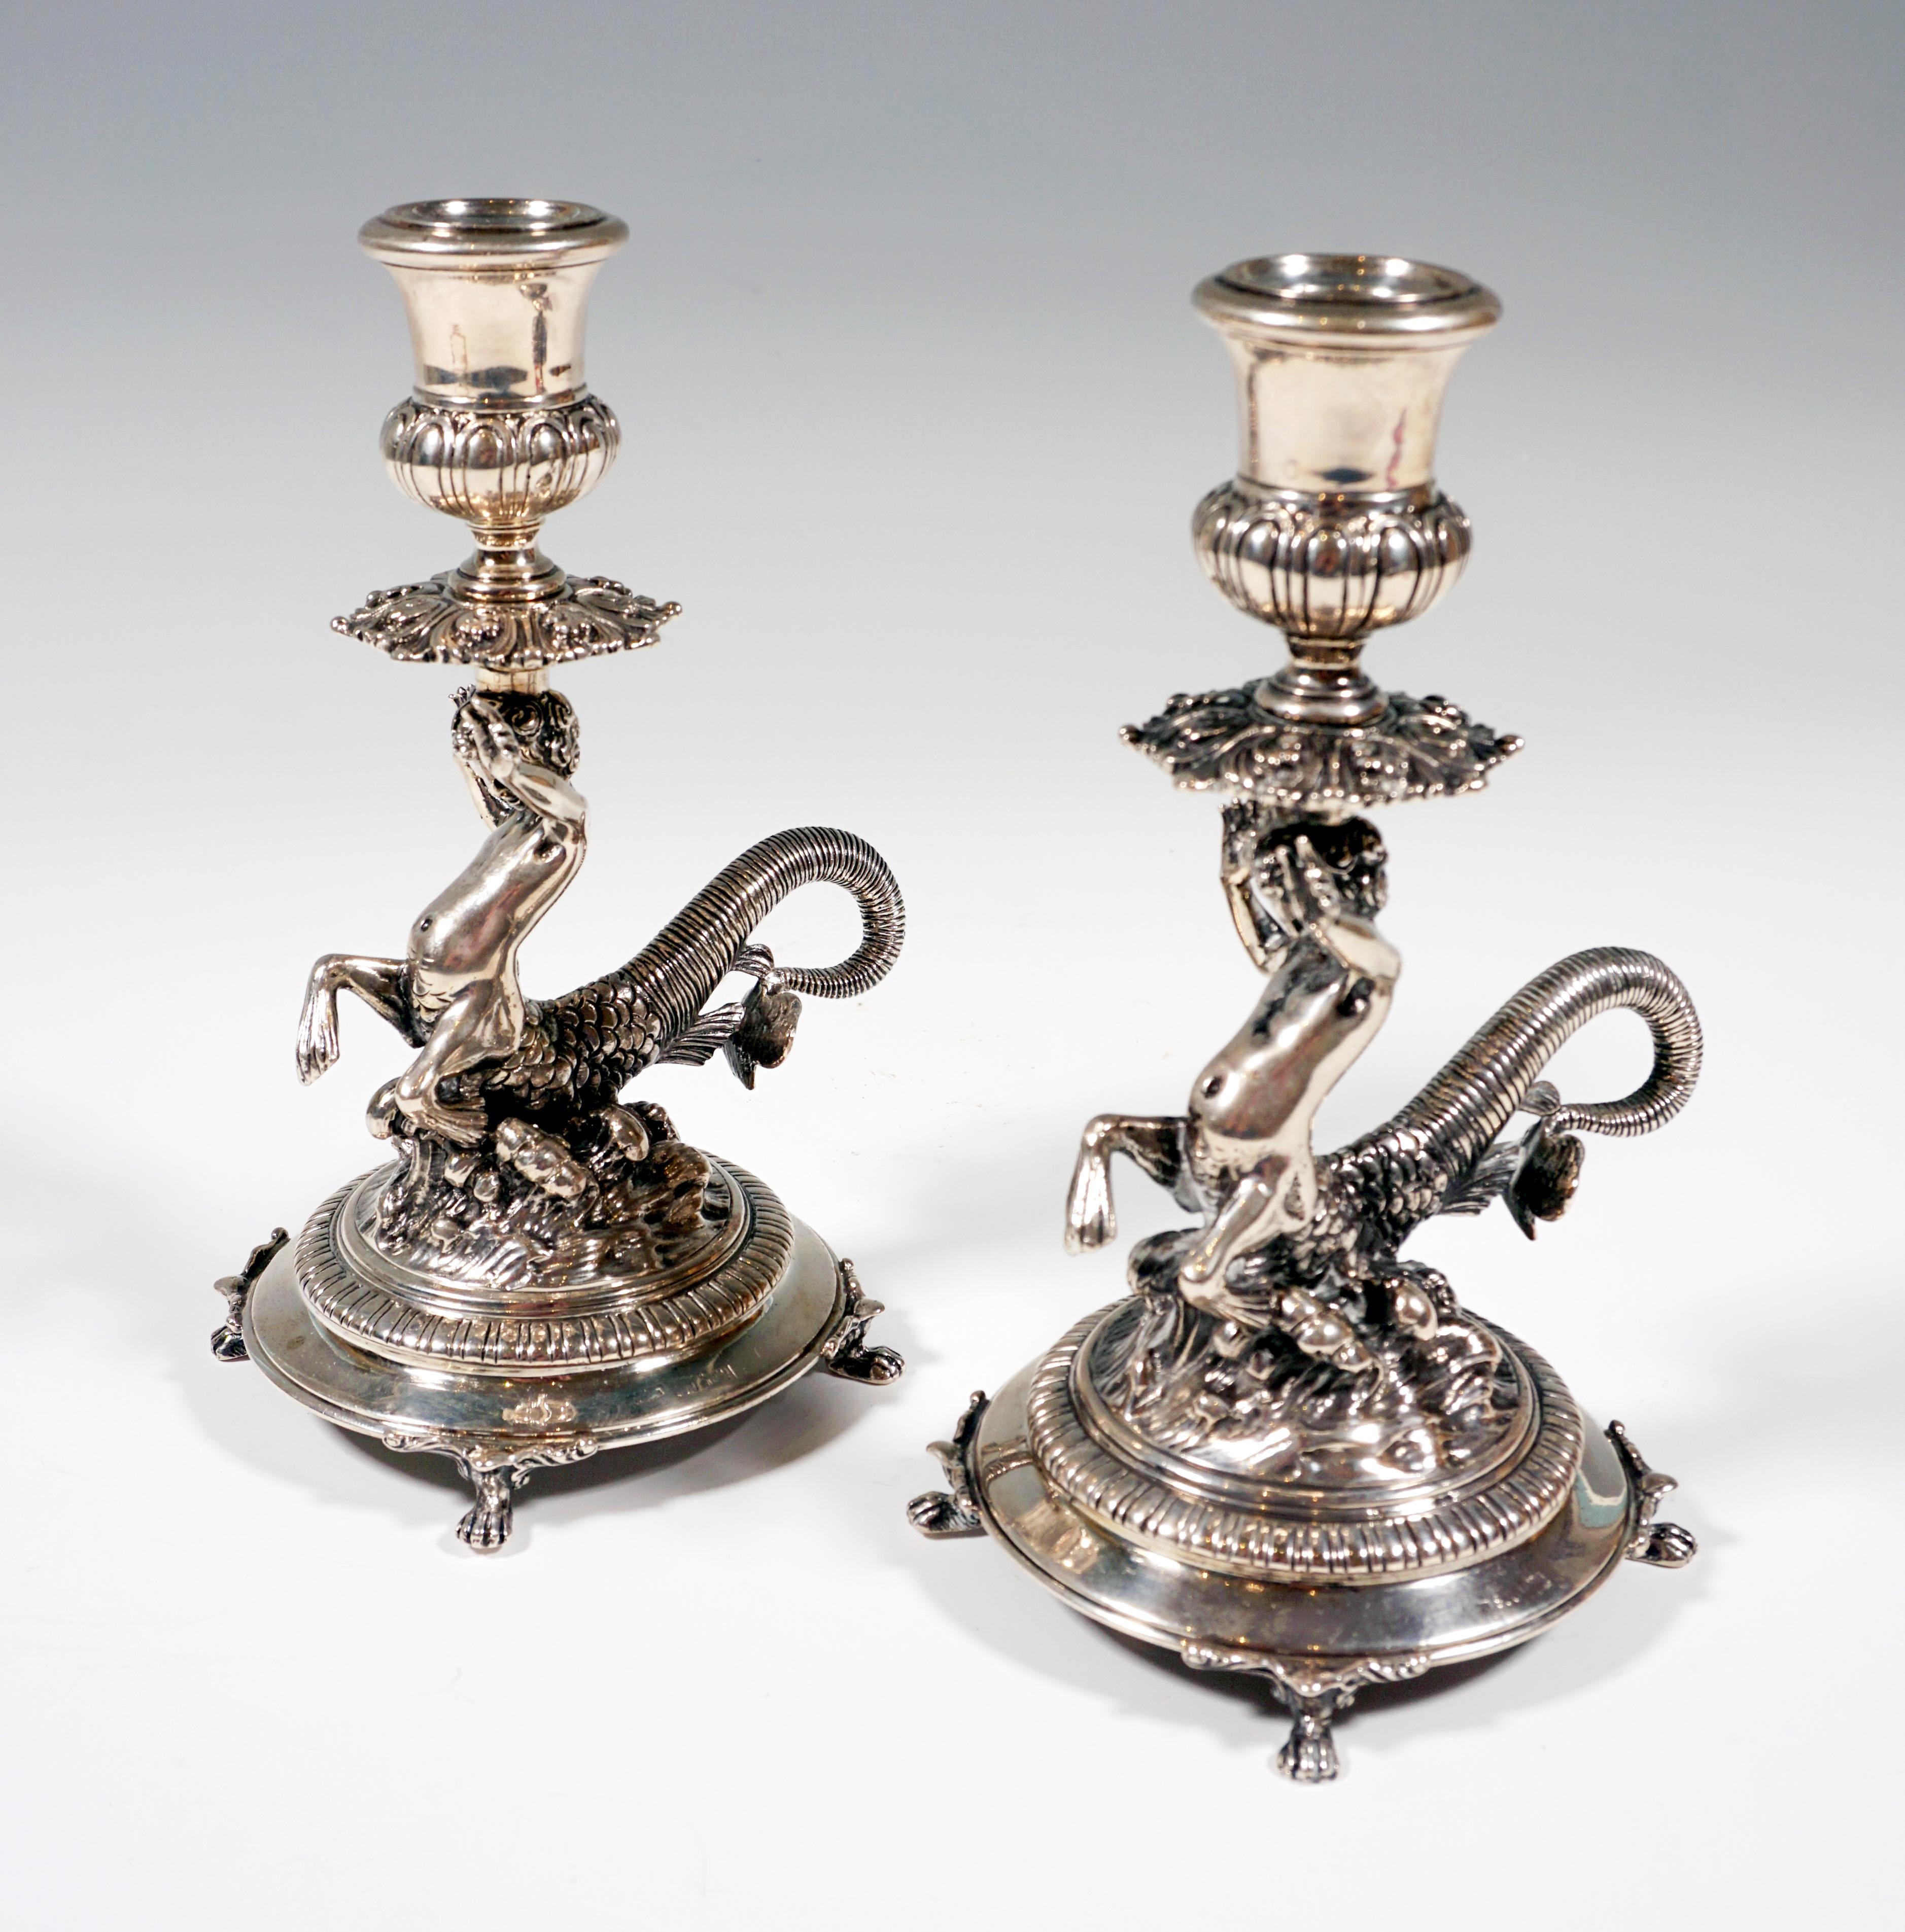 Art Deco Pair of Italian Silver Candle Holders with Cupids as Tritons, Milan, Around 1935